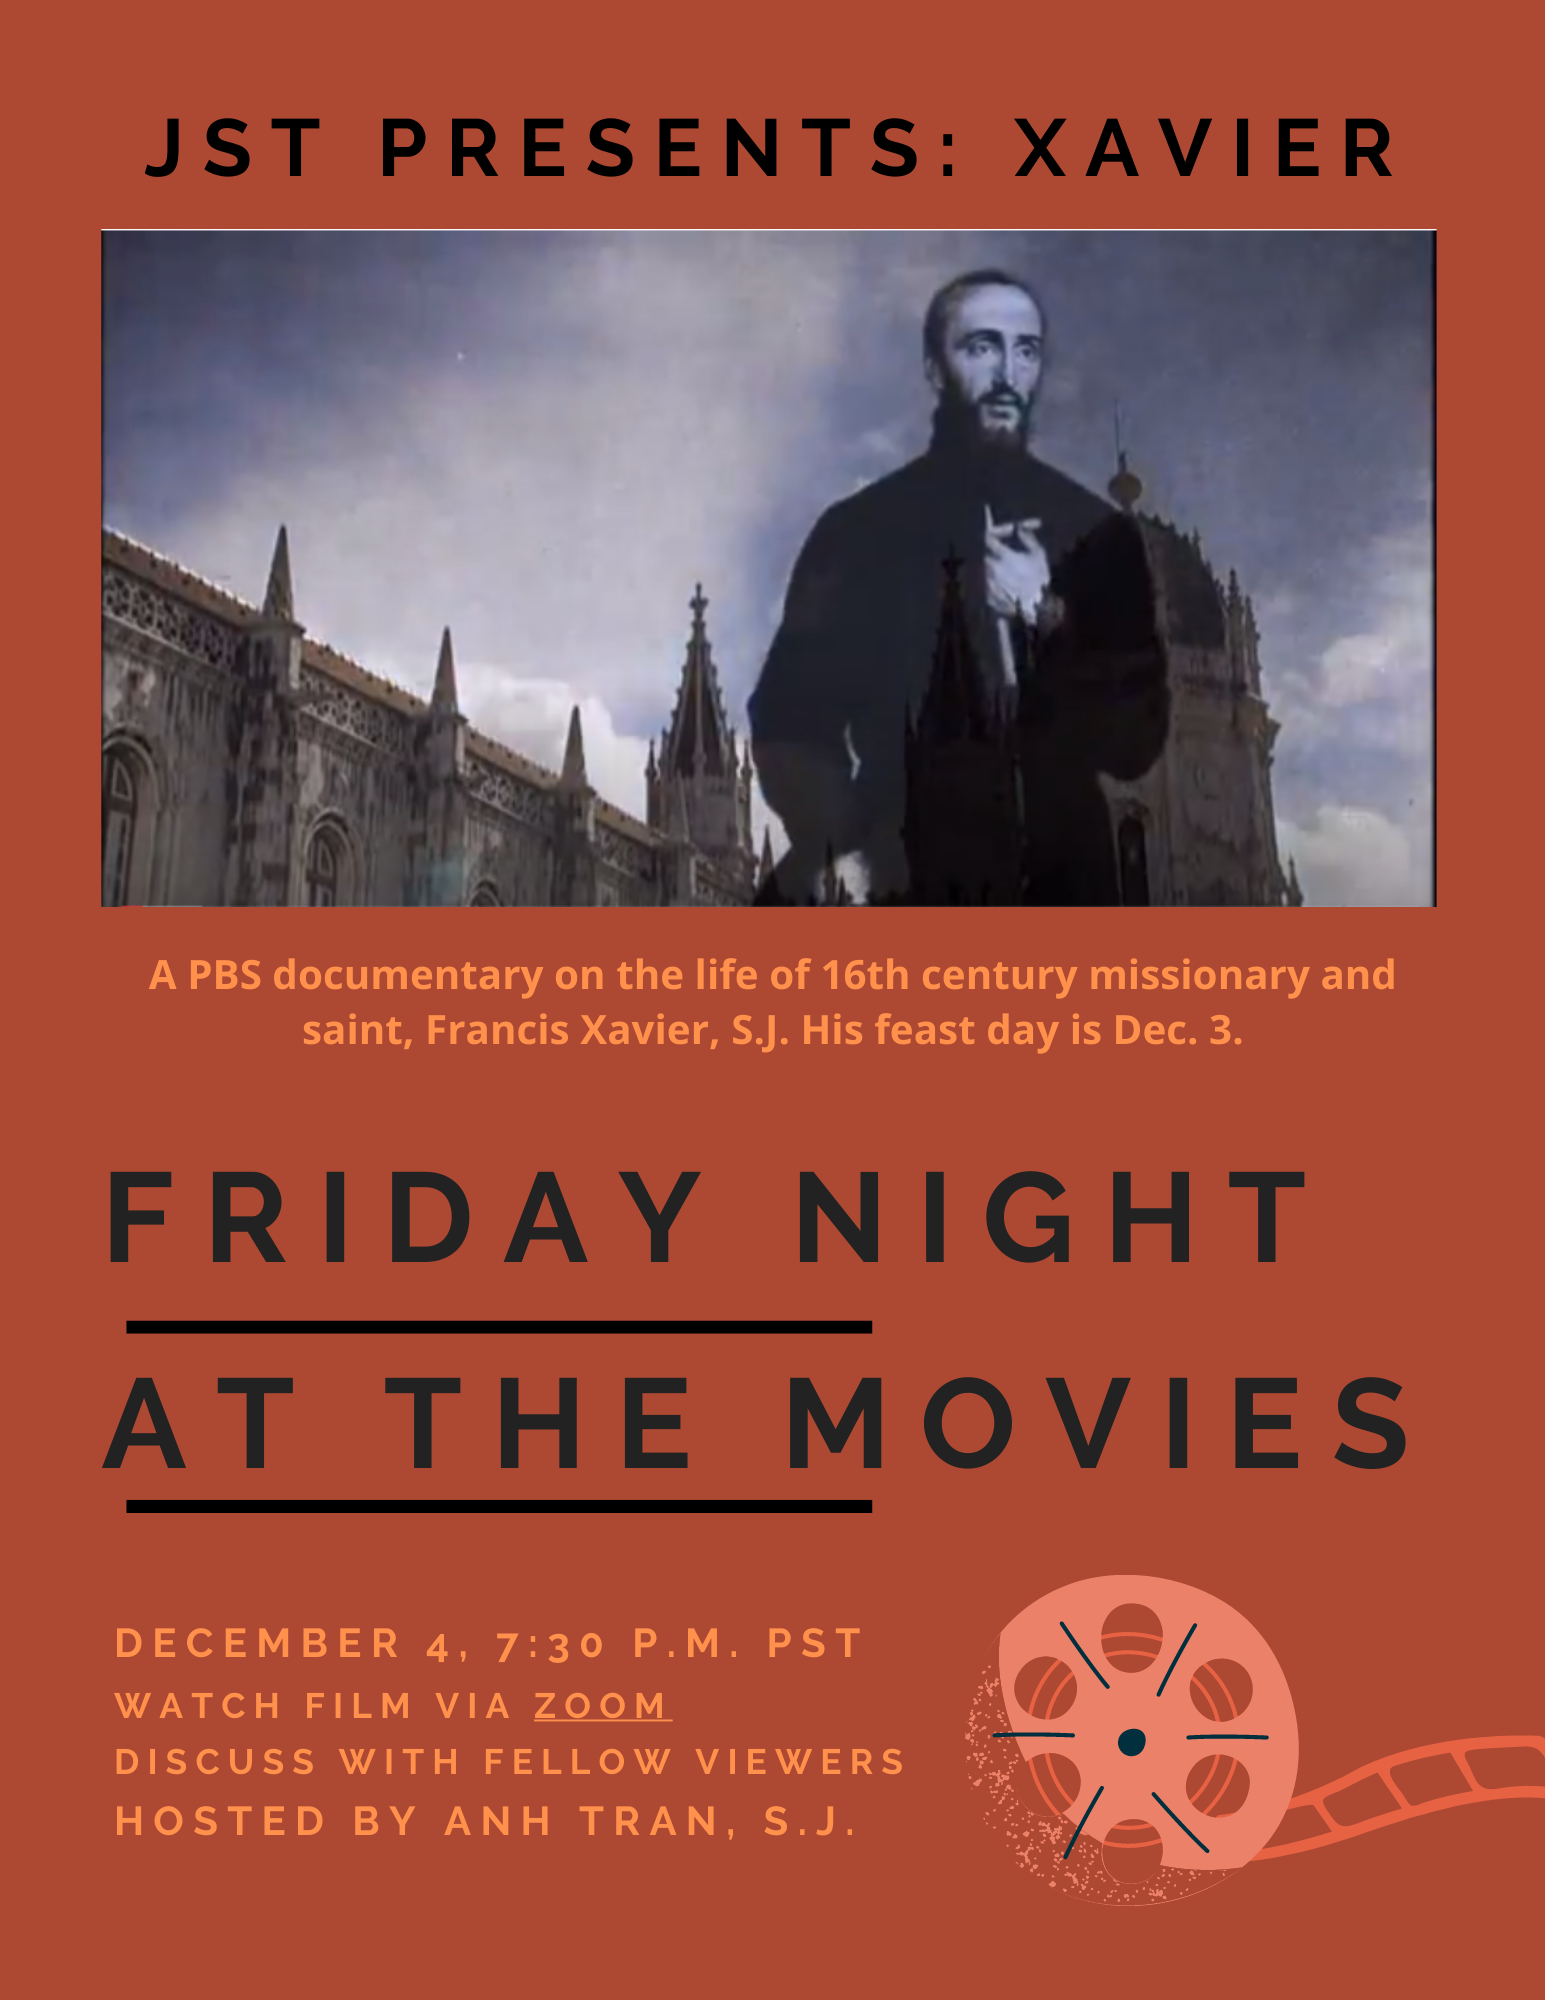 Poster with info on movie night, Dec. 4, 7:30 p.m. PDT